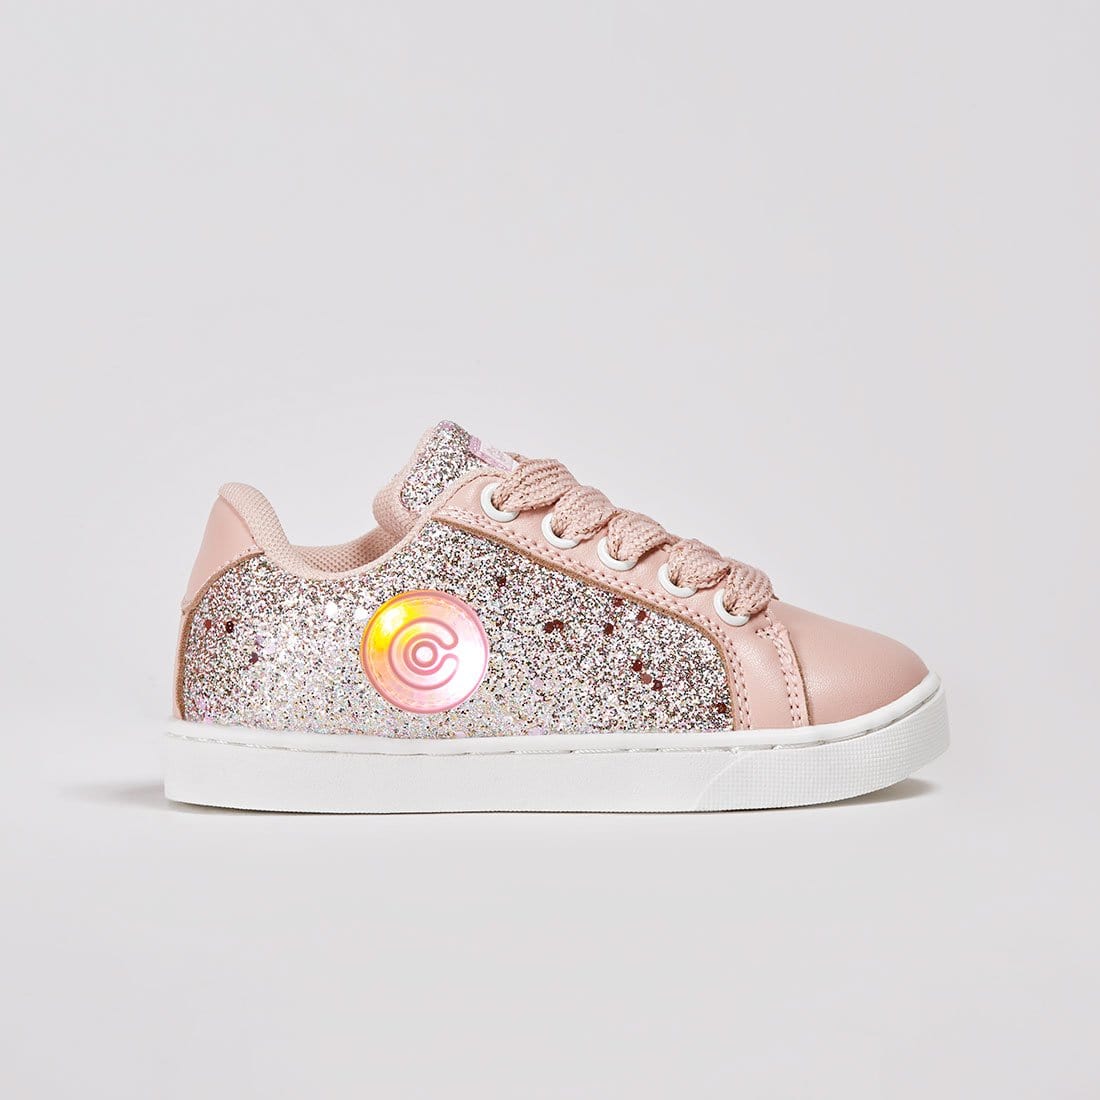 CONGUITOS Shoes Girl's Pink Glitter Sneakers with Lights